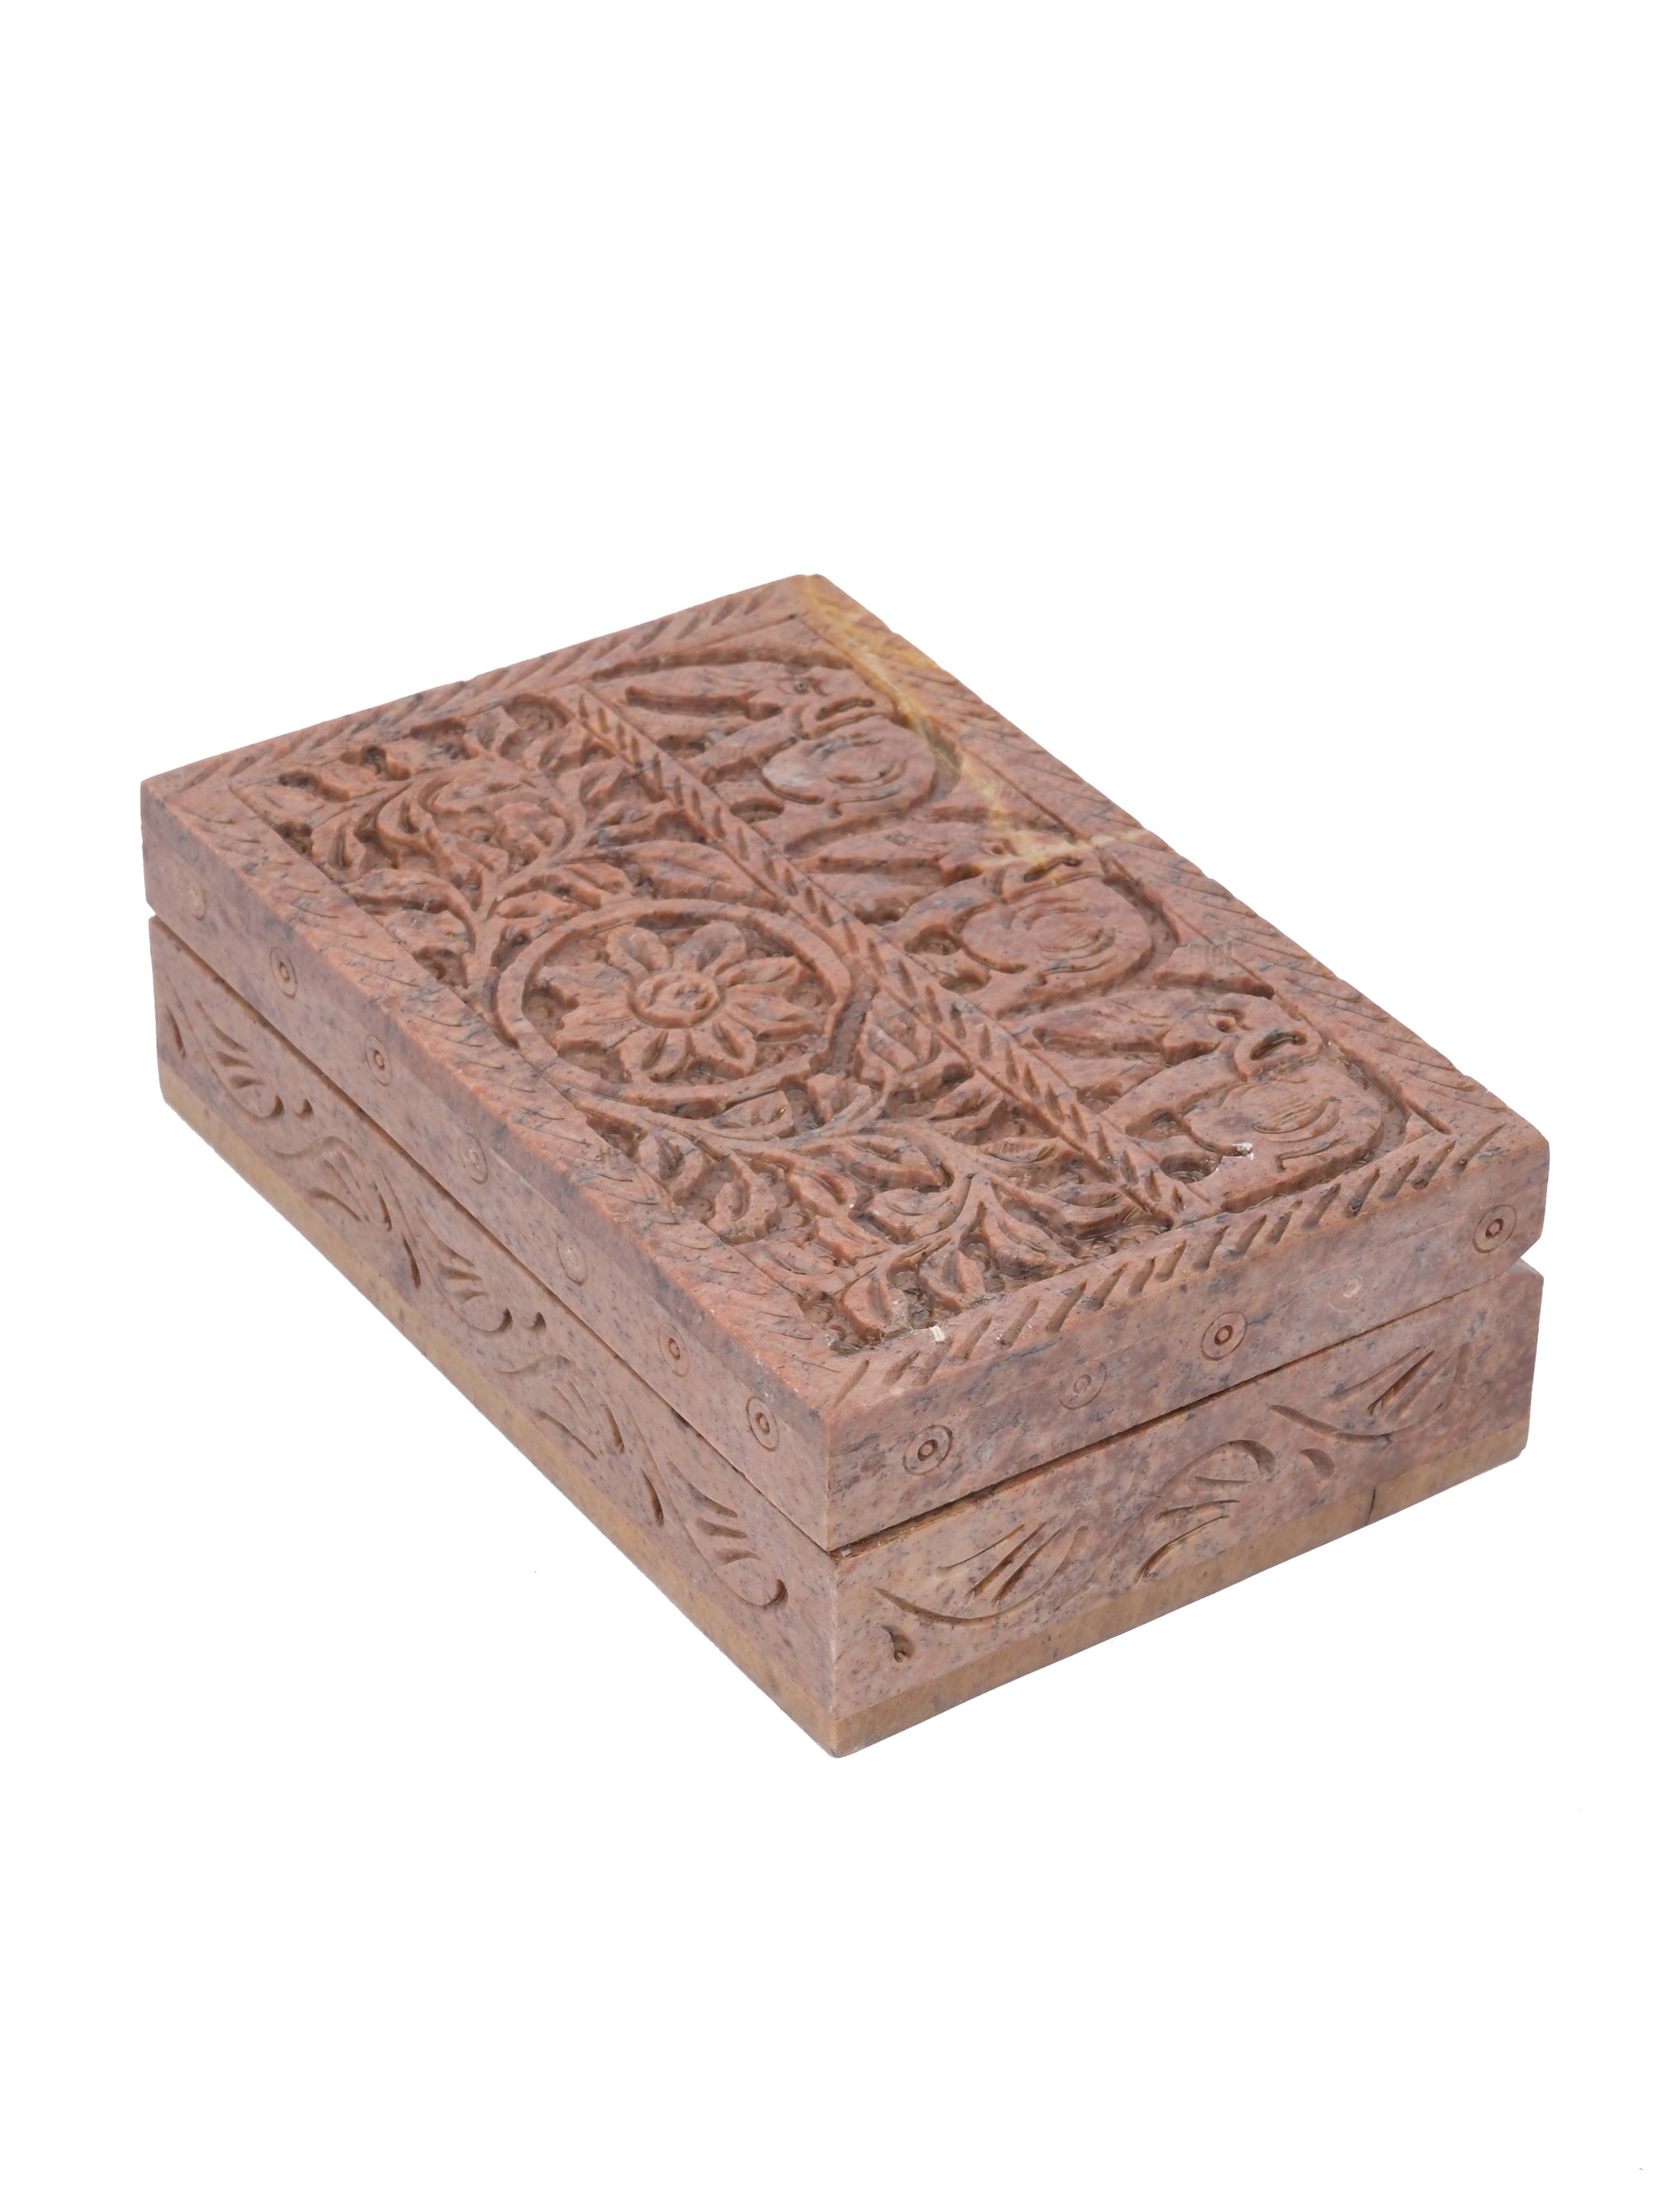 Medium size Jewellery / Storage box handcrafted from soapstone - The Heritage Artifacts